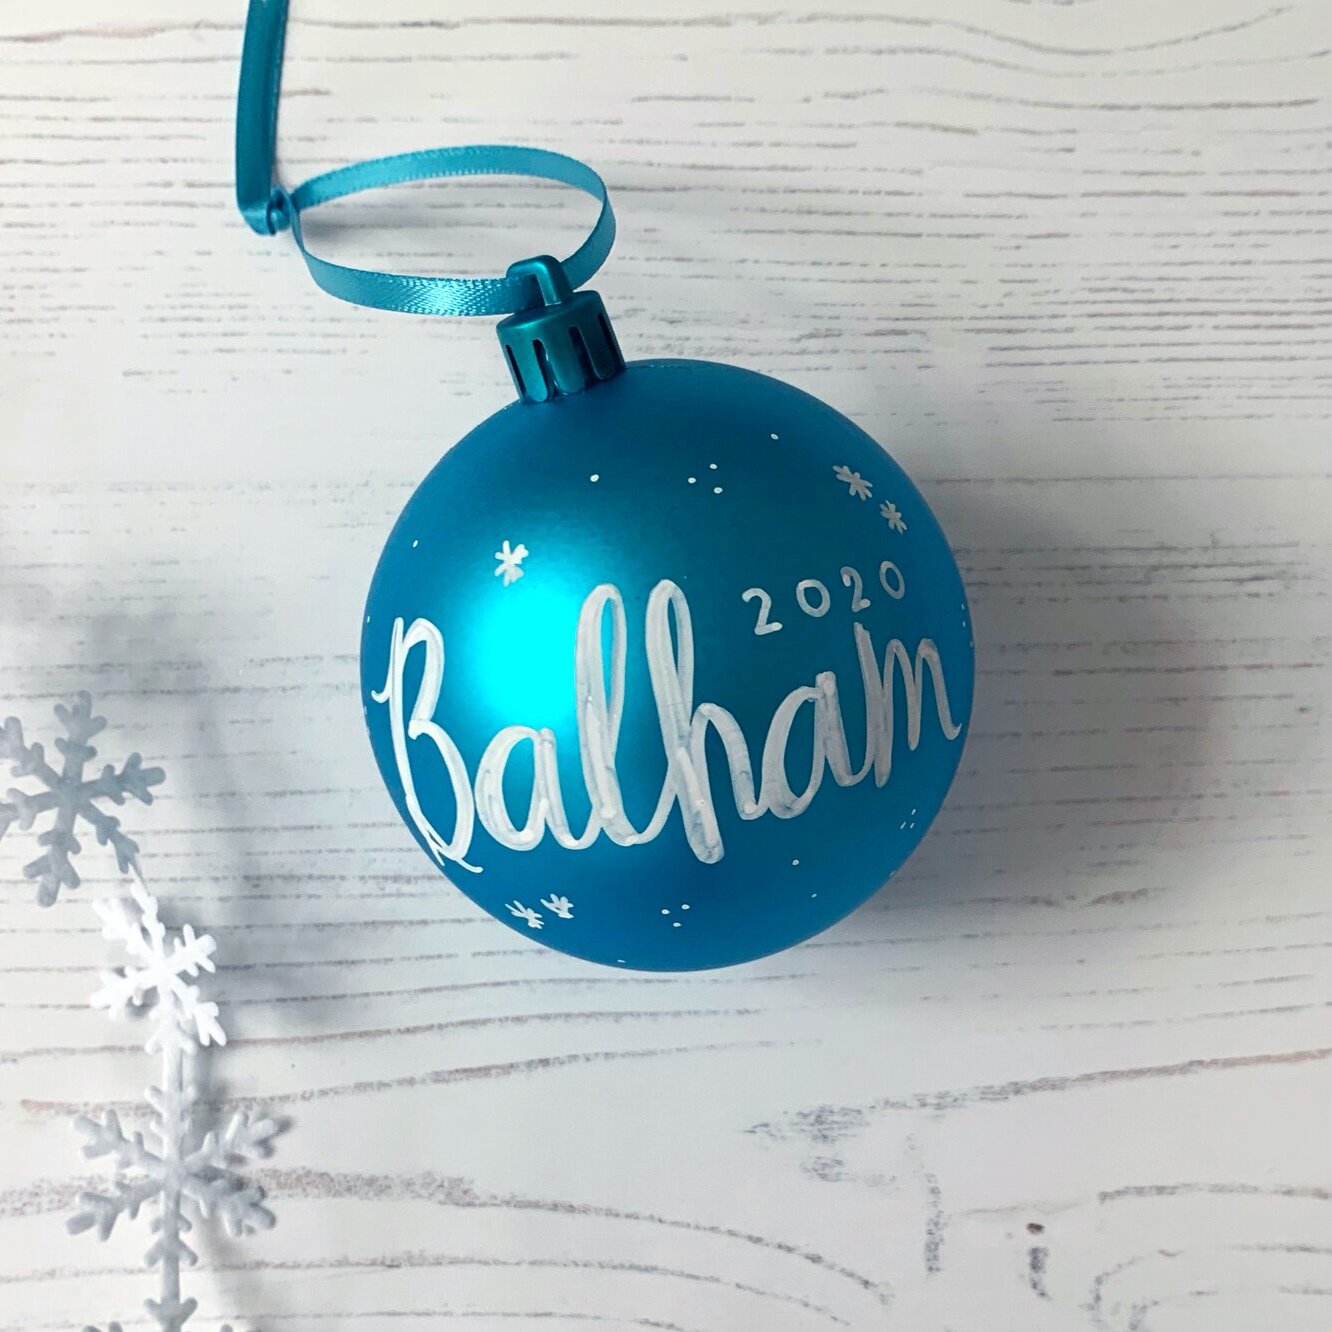 Turquoise baubles